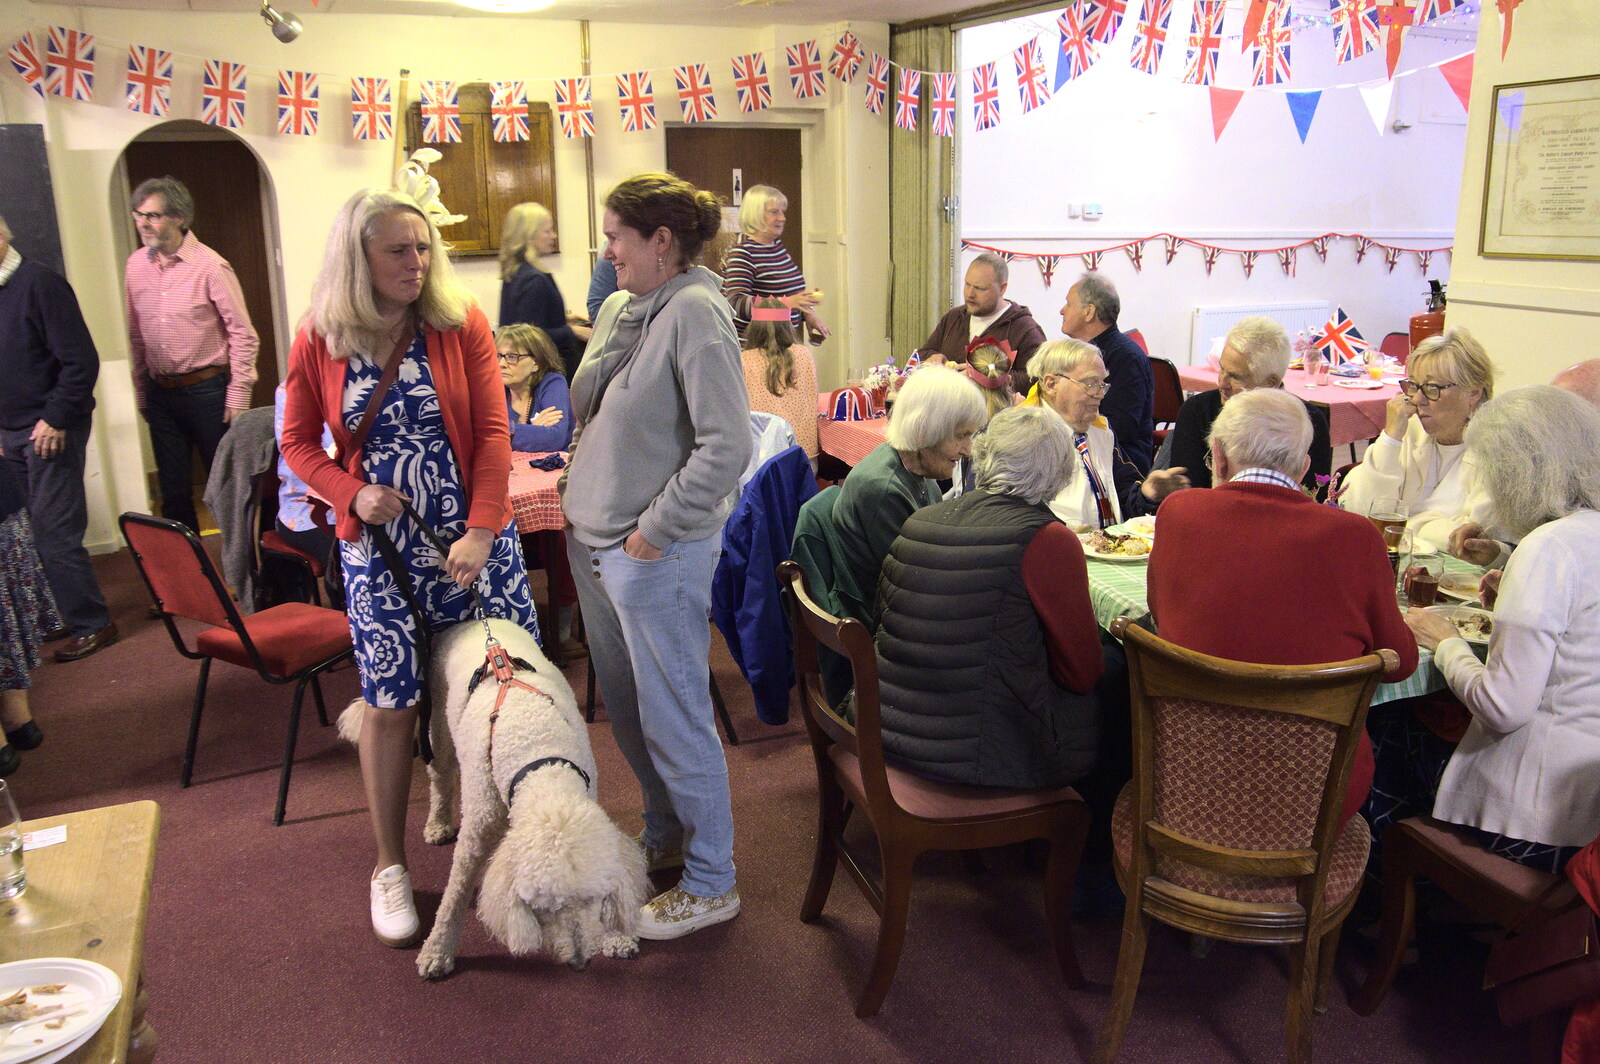 Platinum Jubilee Sunday in Palgrave, Brome and Coney Weston - 5th June 2022: Isobel chats to someone with a large dog